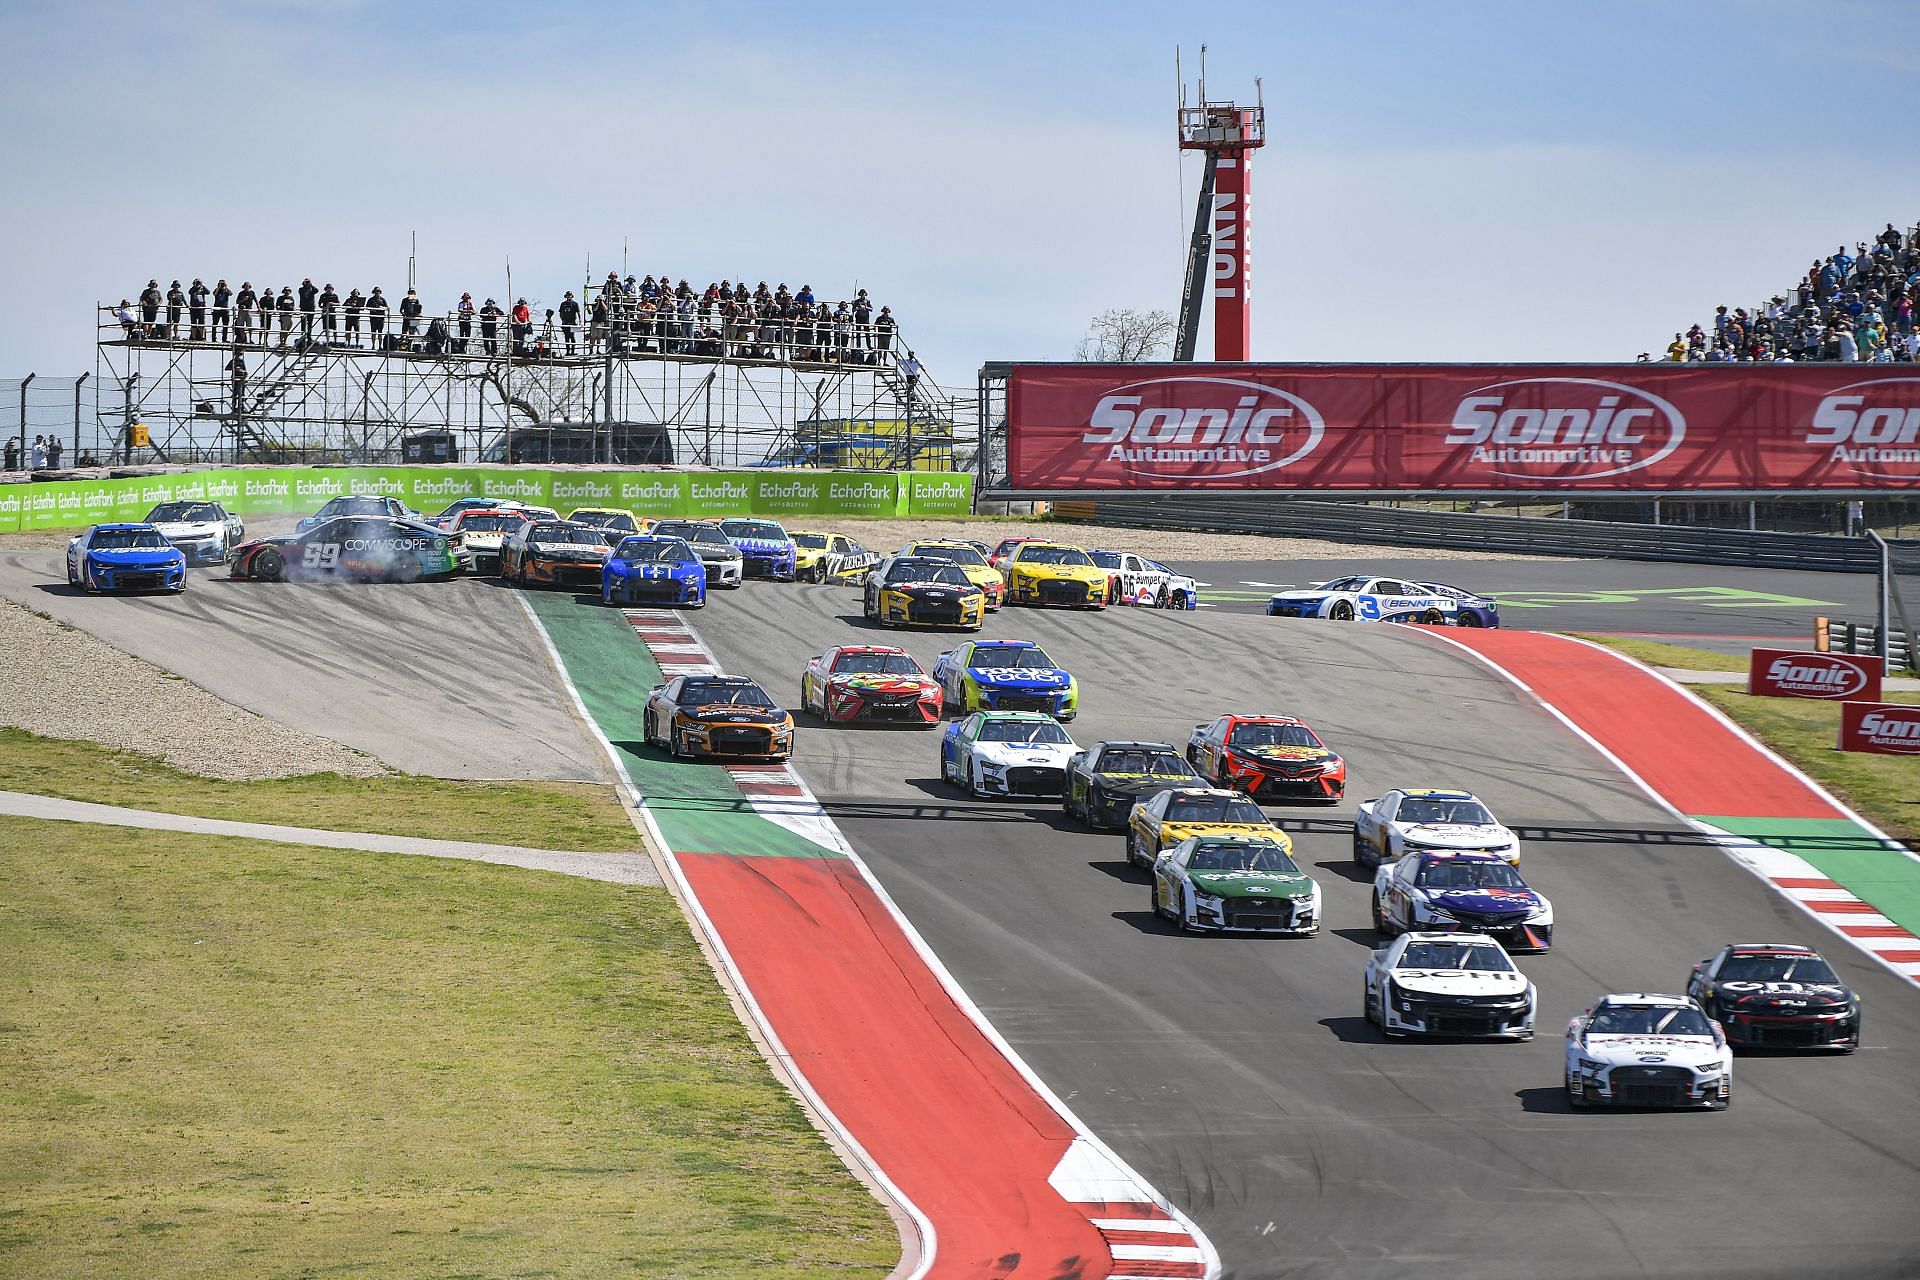 Daniel Suarez in the No. 99 CommScope Chevrolet spins during the 2022 NASCAR Cup Series Echopark Automotive Grand Prix at Circuit of The Americas in Austin, Texas. (Photo by Logan Riely/Getty Images)